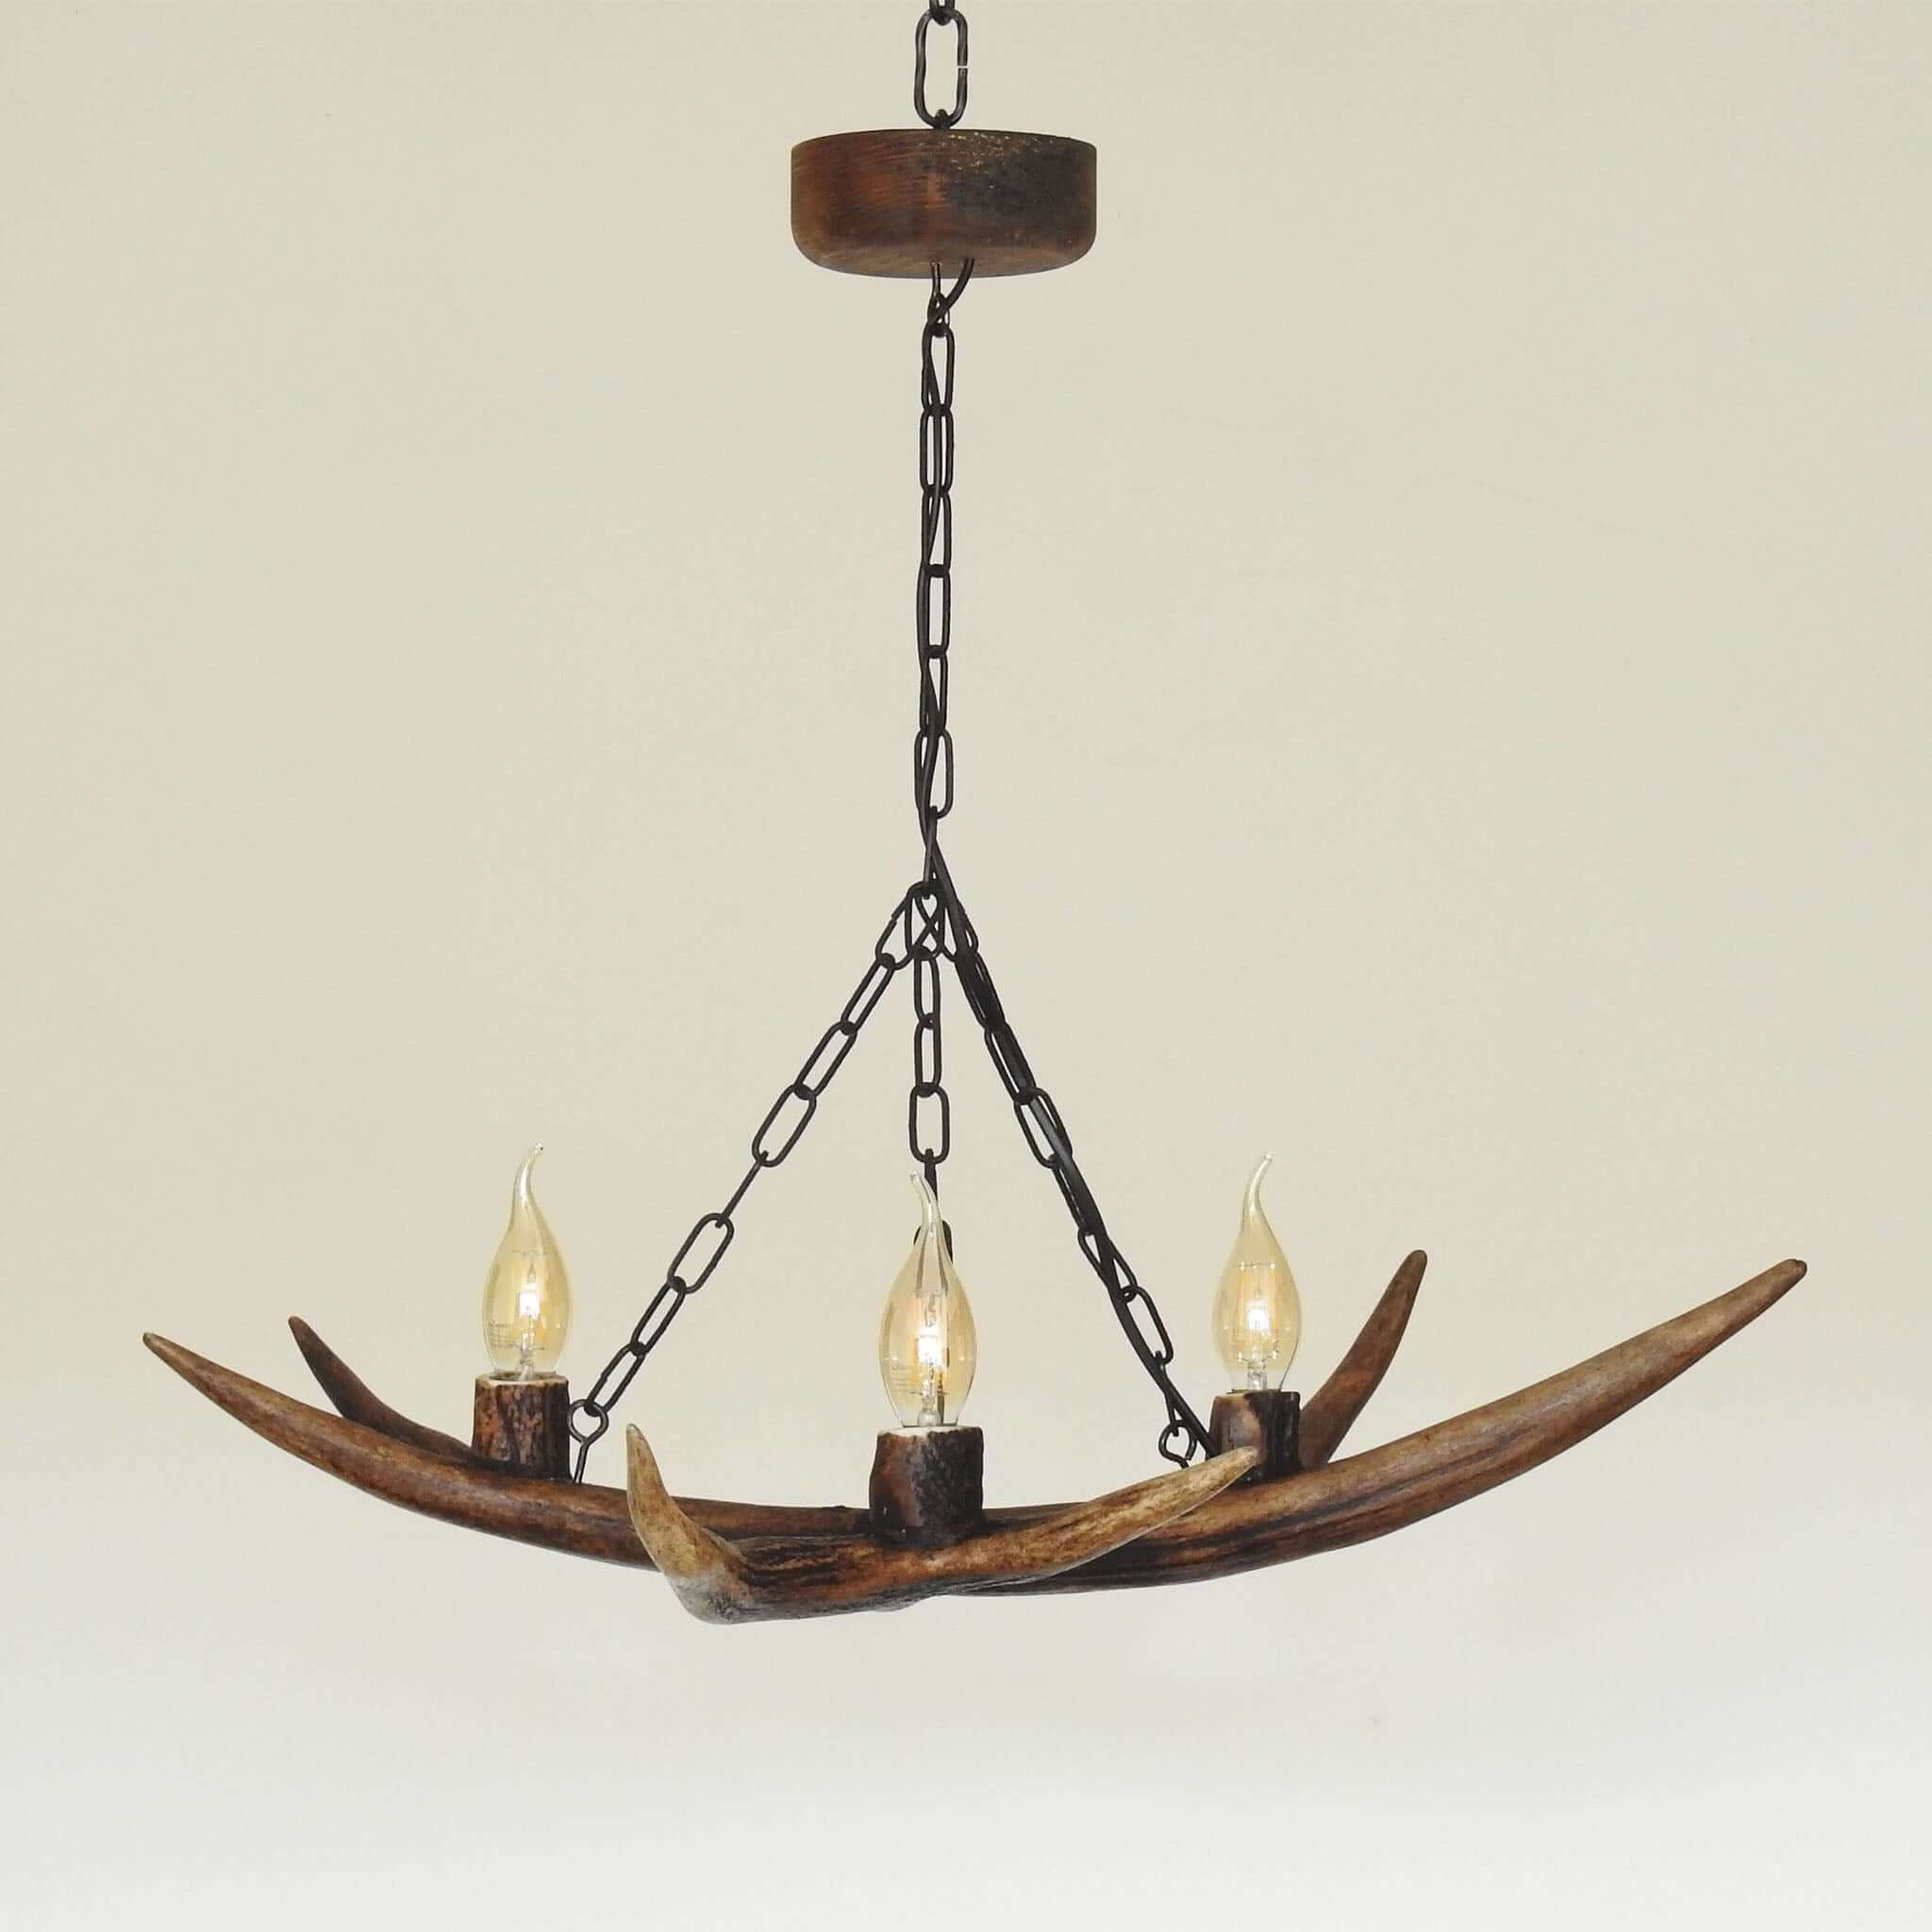 Small antler chandelier with 3 arms.